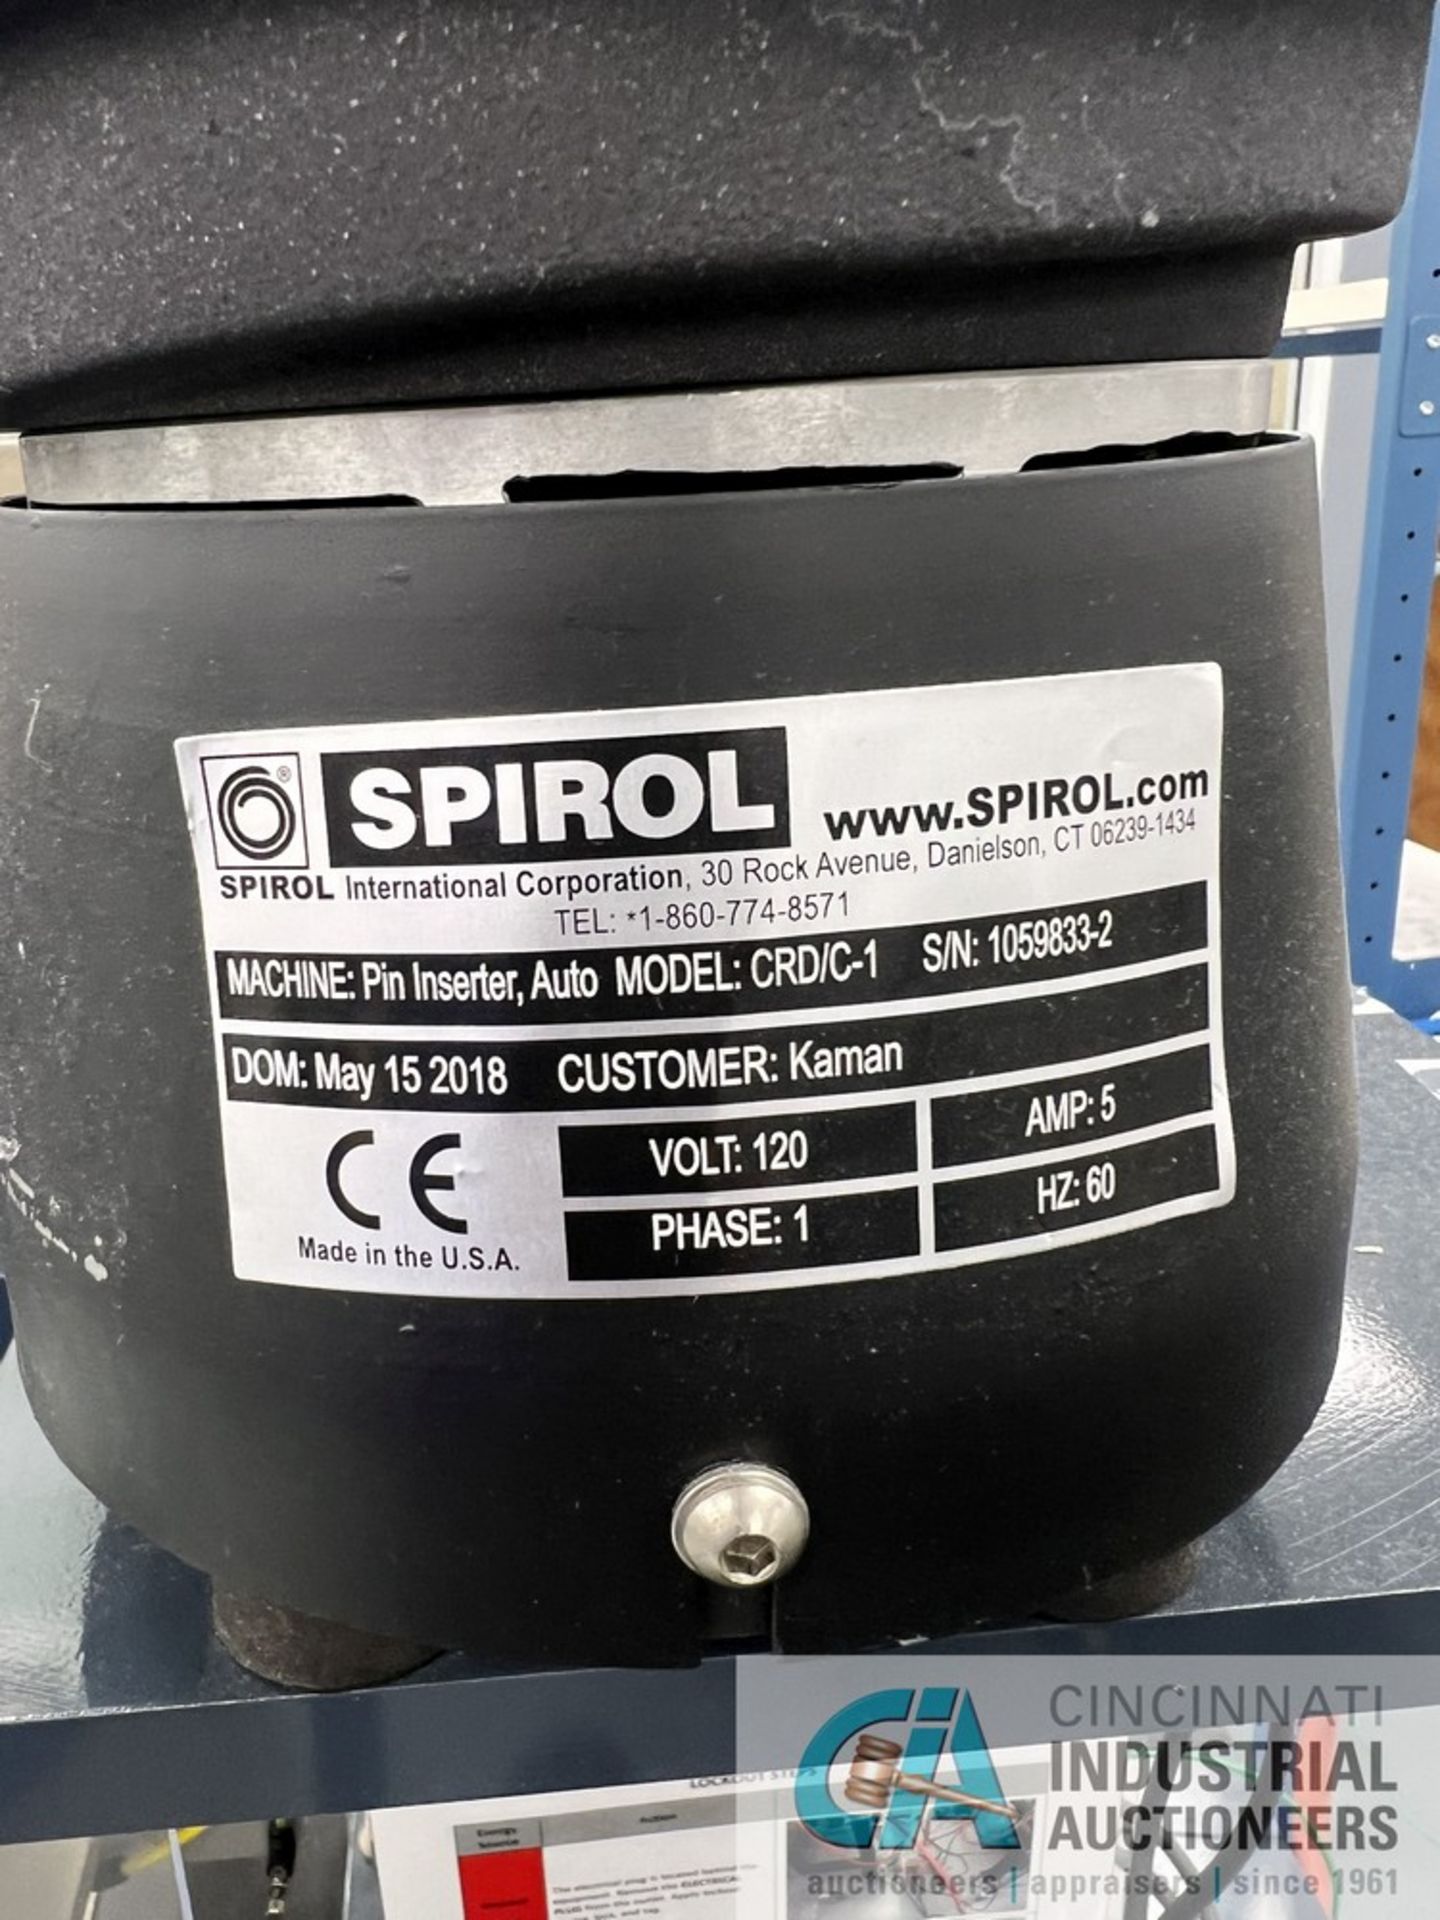 SPIROL MODEL CRD AUTO PIN INSERTER; S/N 10559833, WITH (2) 7" VIBRATORY BOWLS (2018) (JPF) - Image 8 of 9